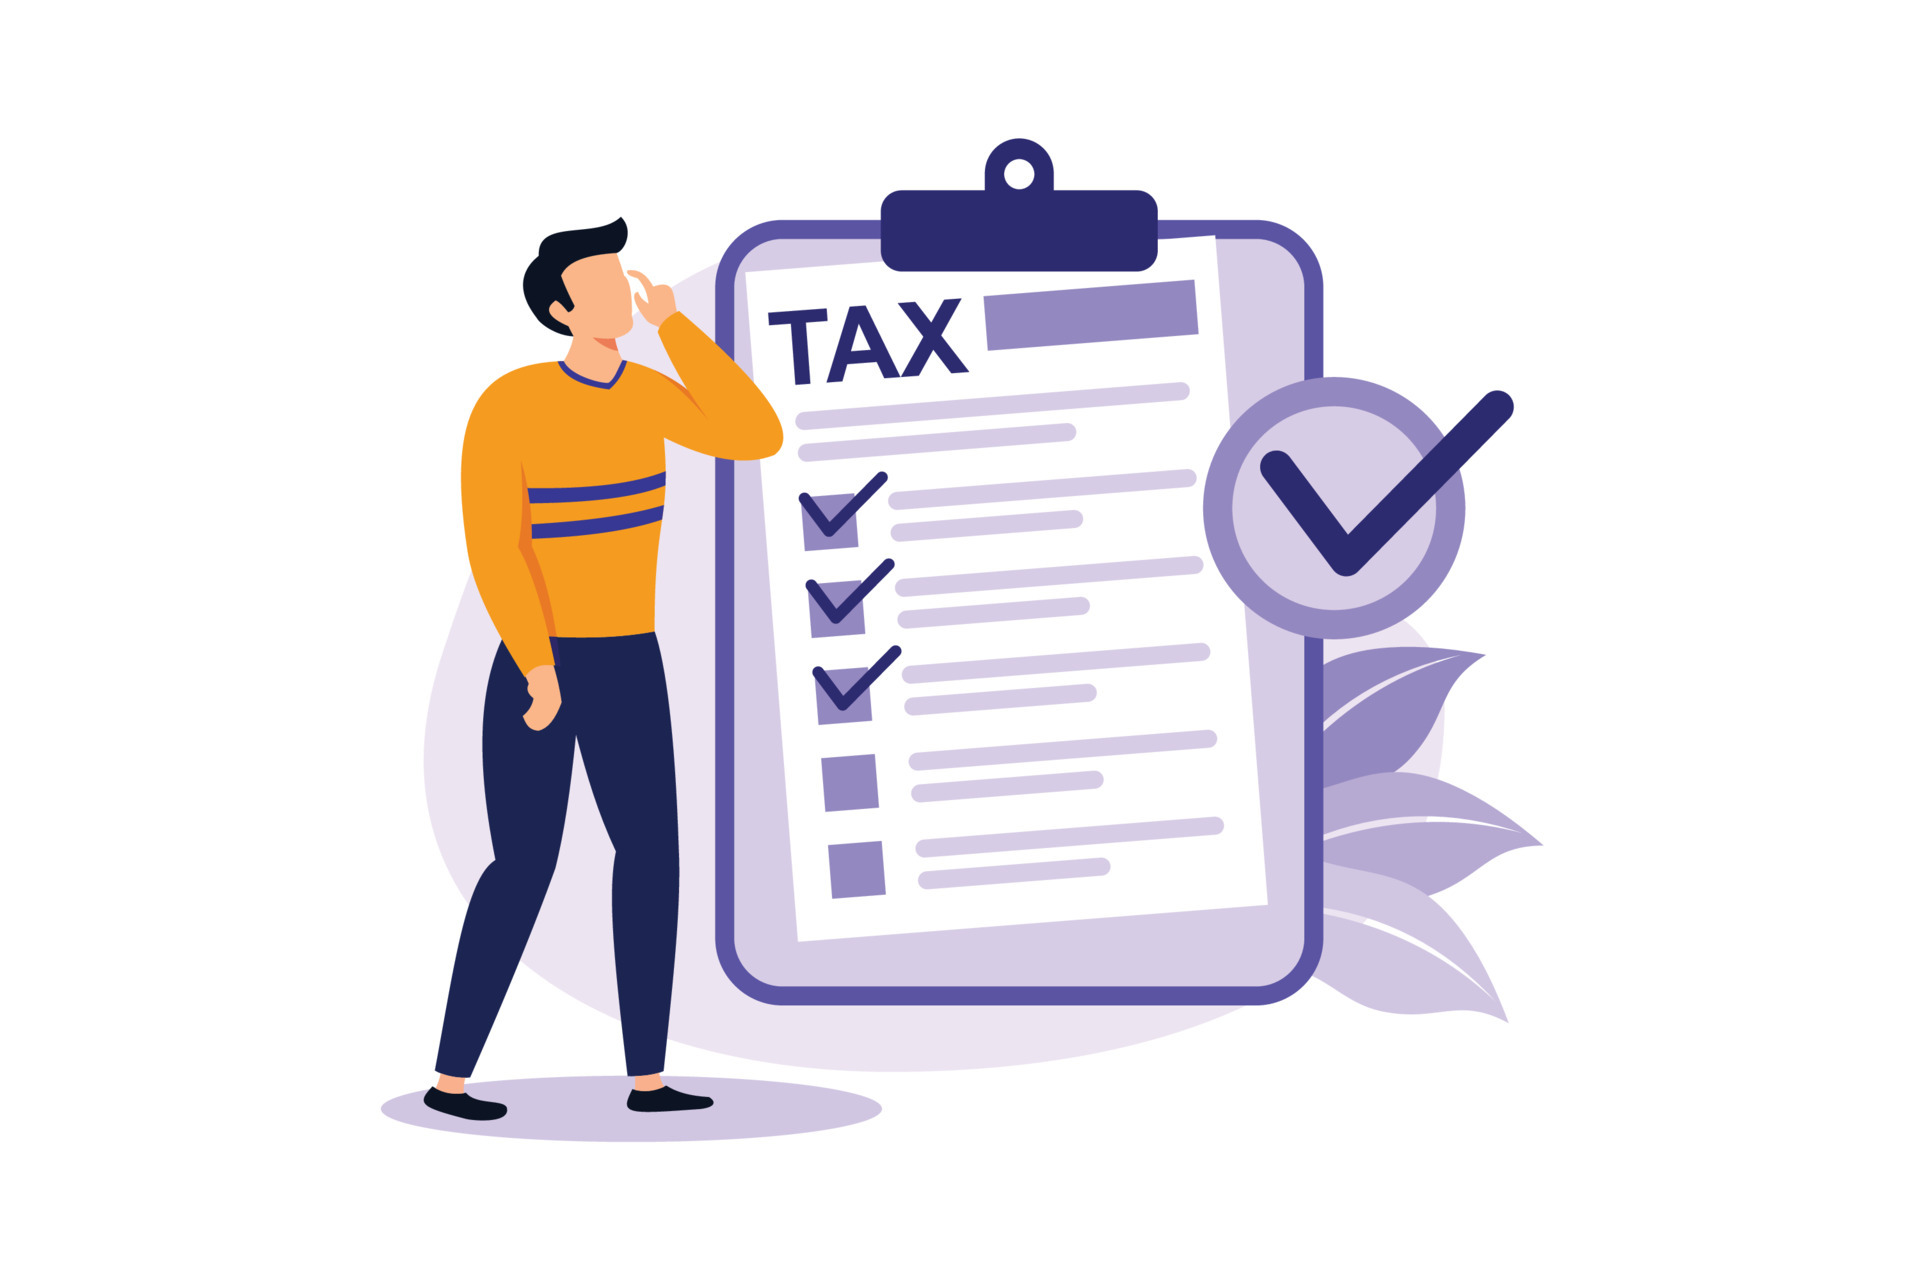 personal-income-tax-illustration-exclusive-design-inspiration-vector.jpg